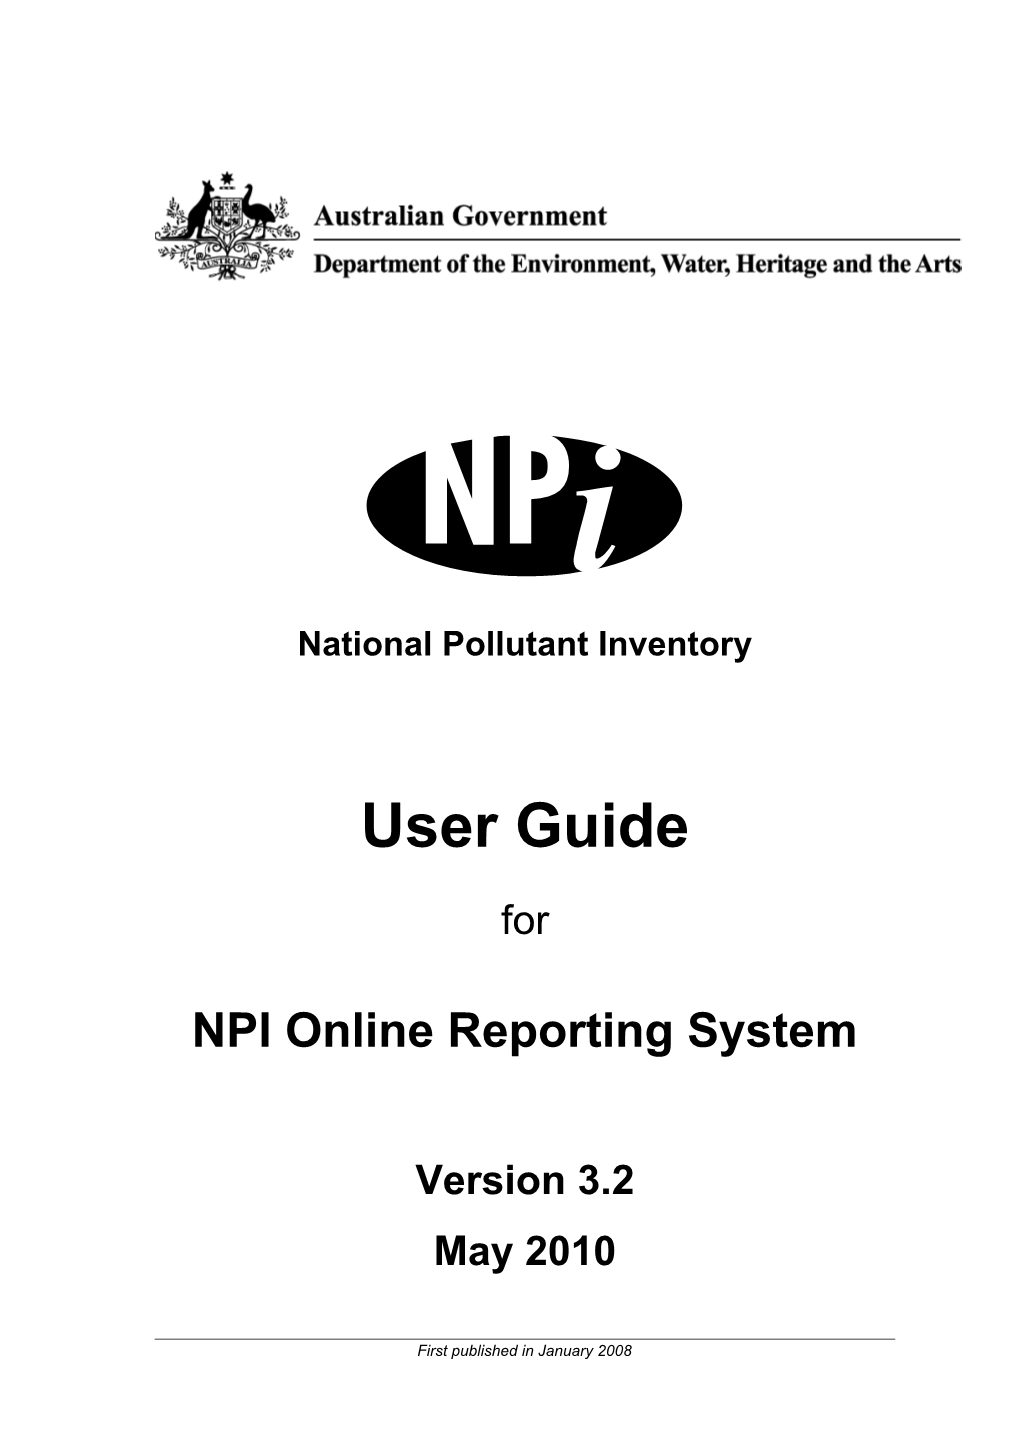 National Pollutant Inventory User Guide for NPI Online Reporting System V3.2 - Section 1